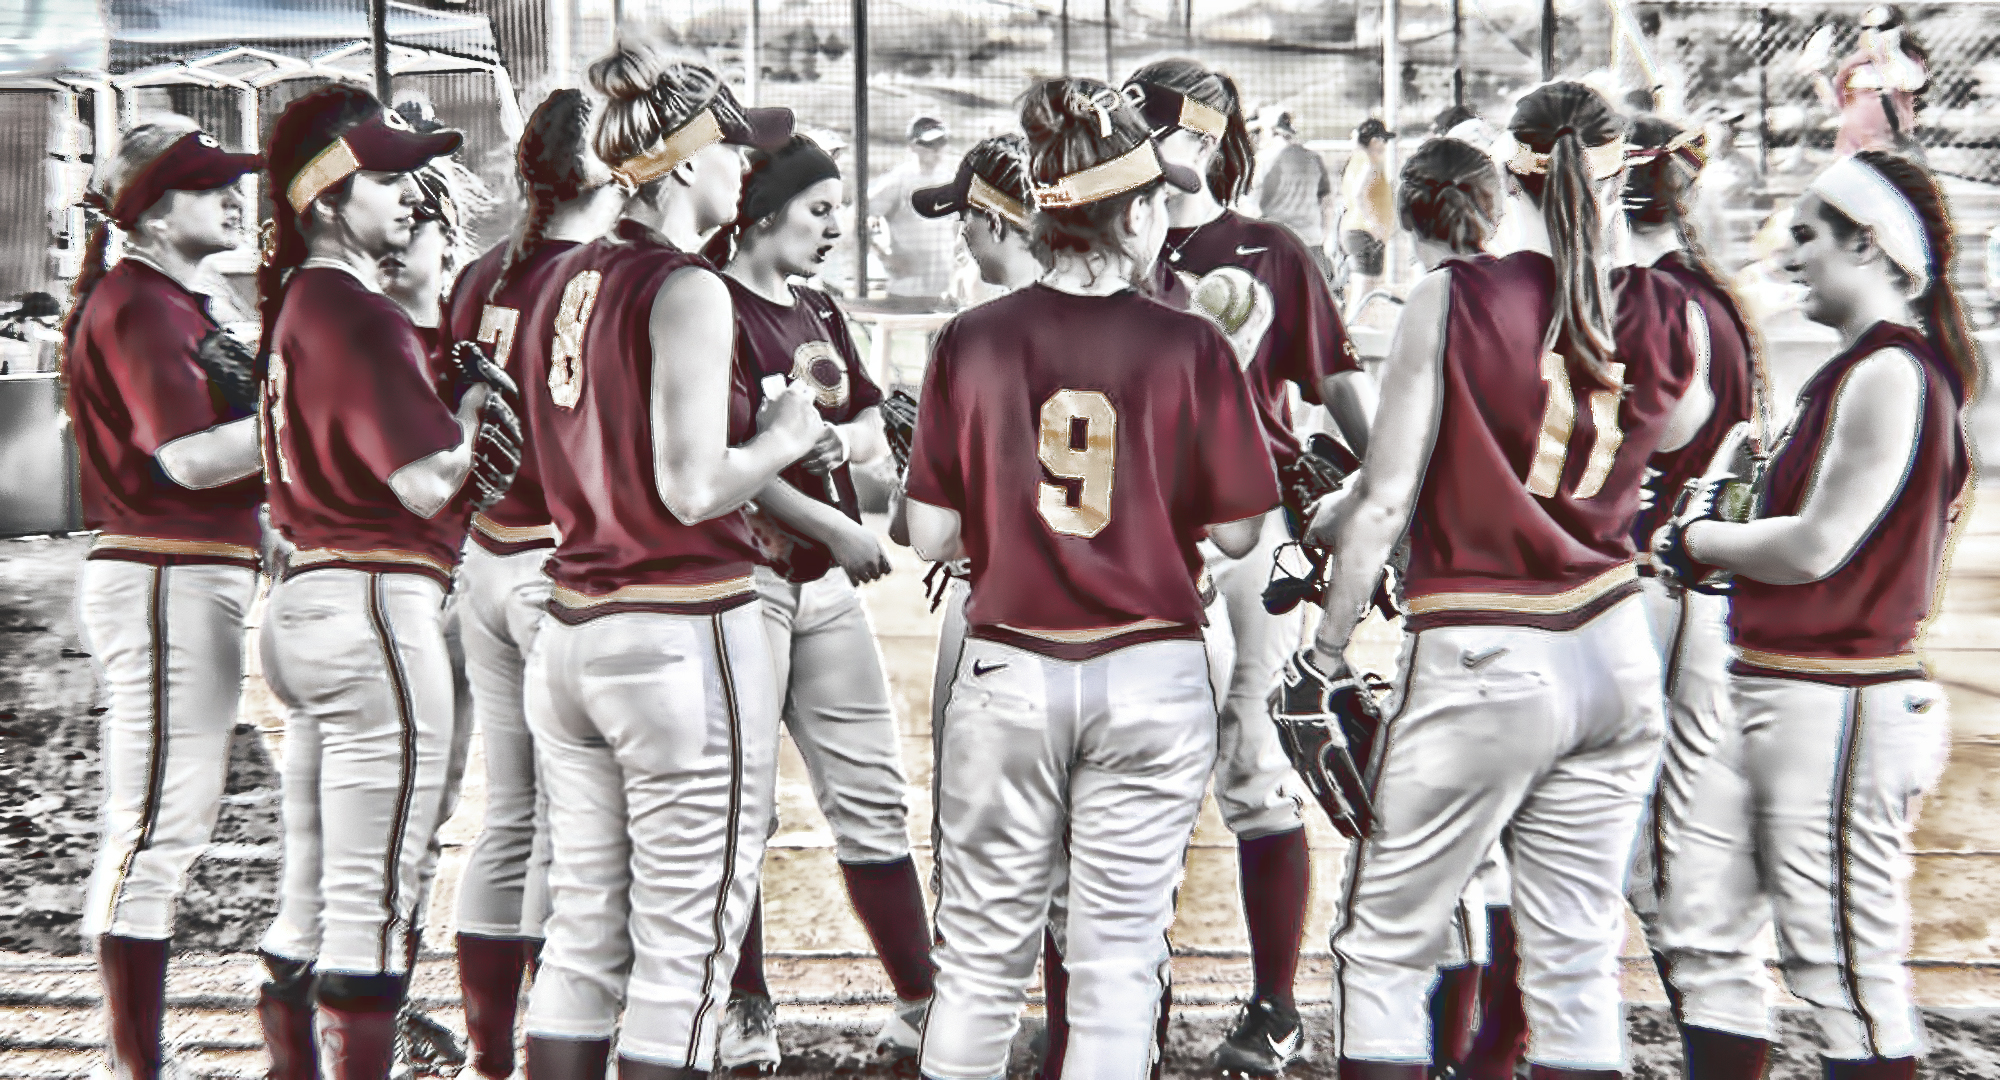 The Cobbers get ready to take the field for one of their 10 games during their annual spring trip to Florida.